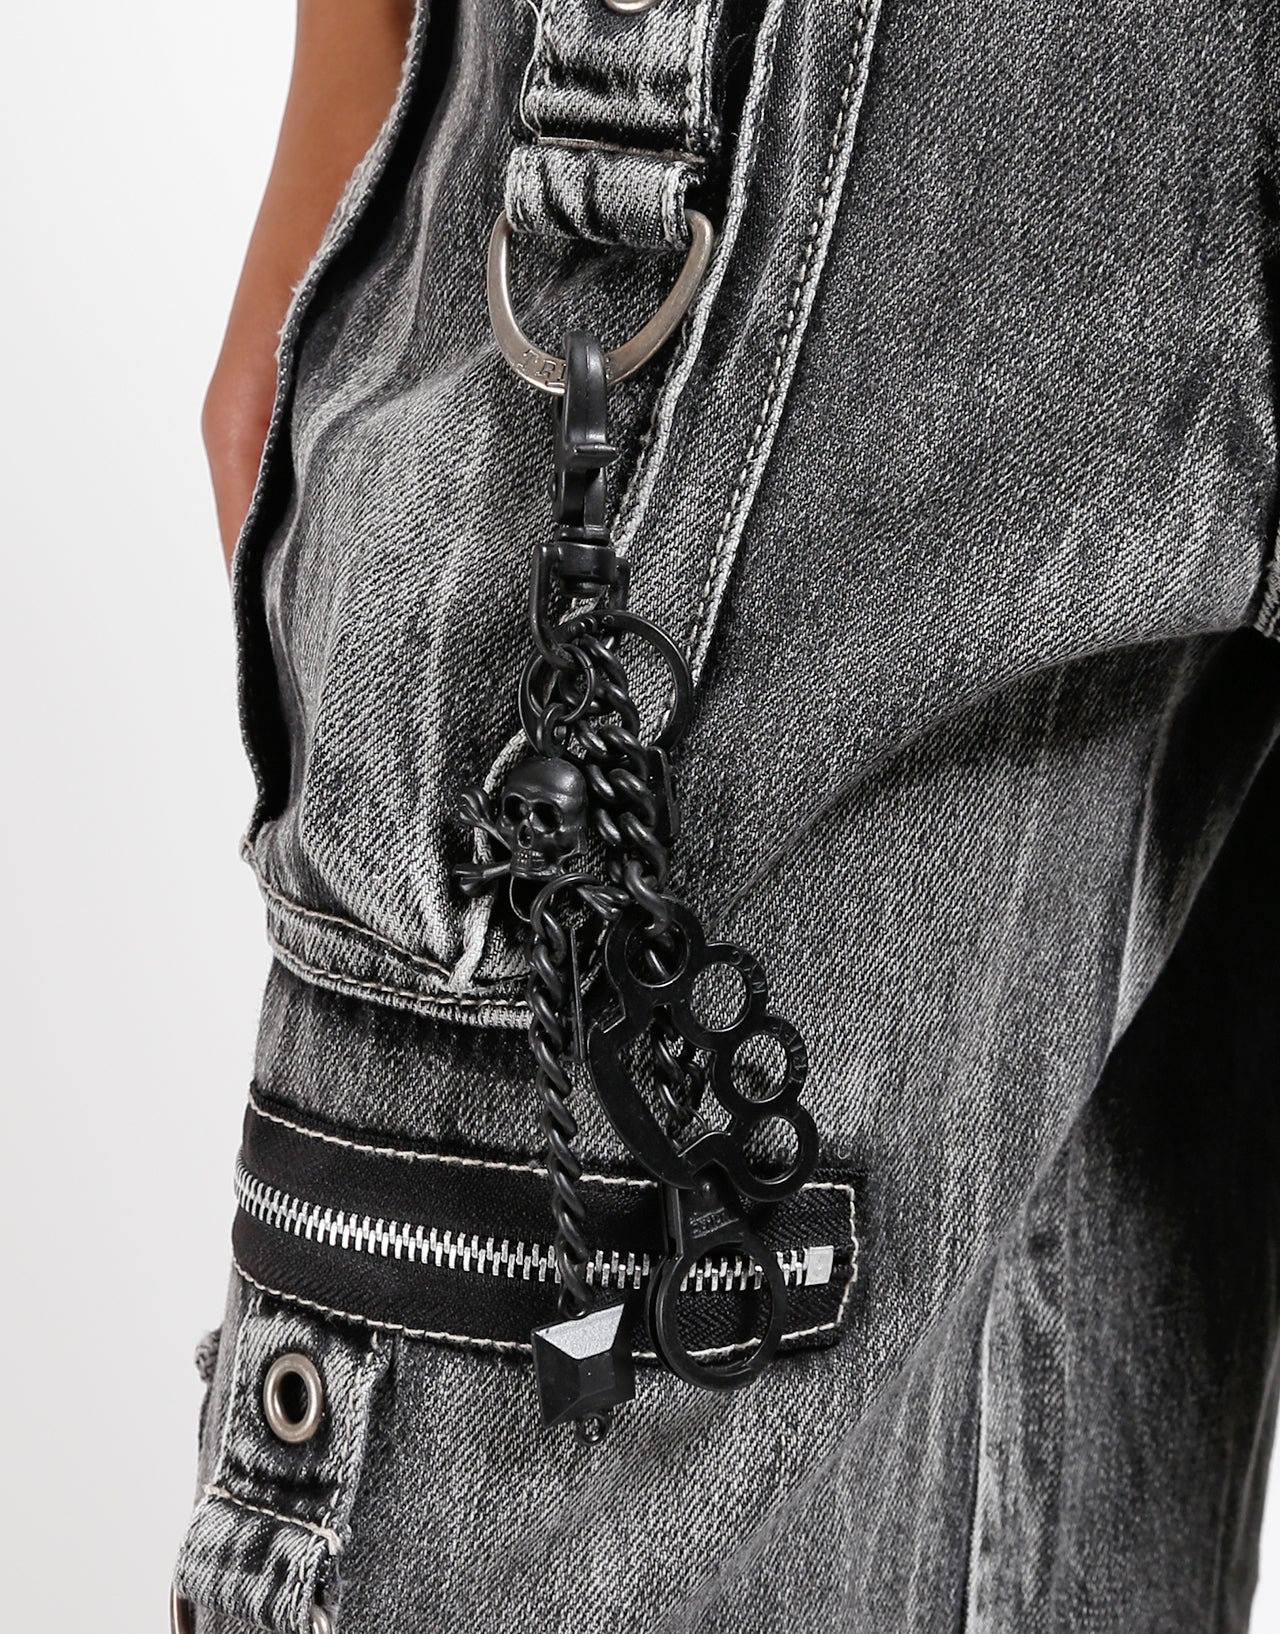 Nut and Bolt Wallet Chain